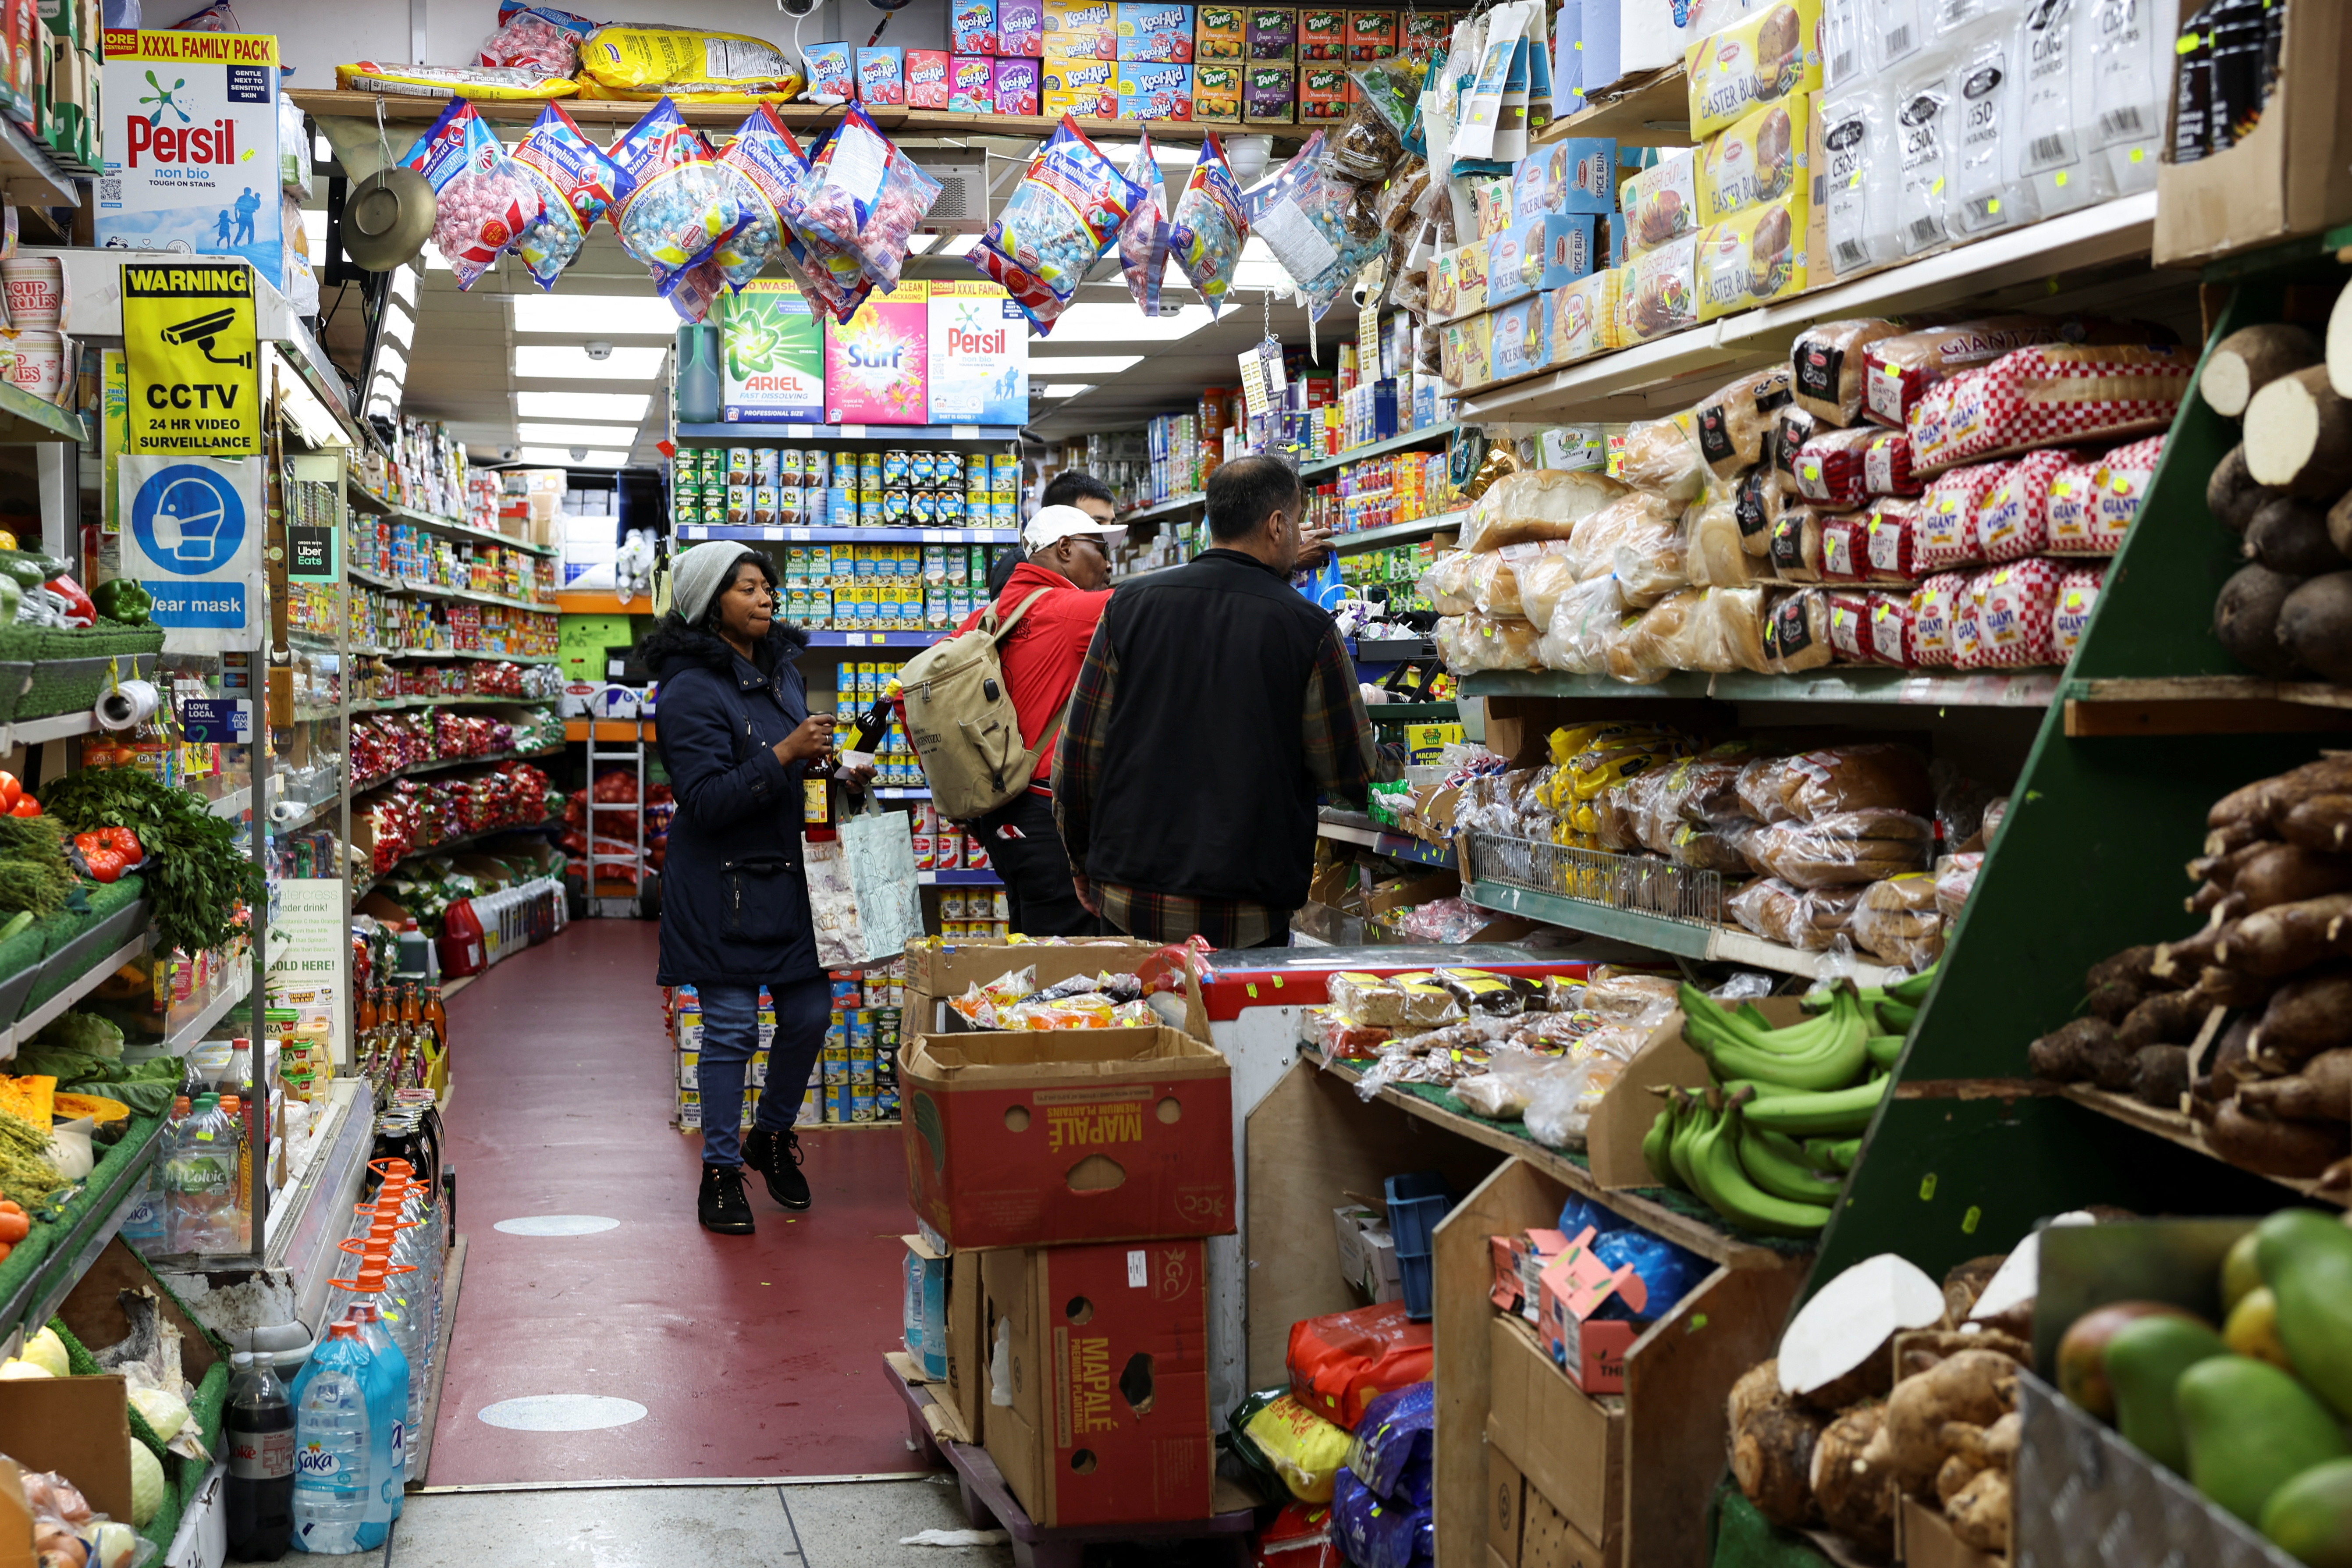 People shop at a grocery market, in London